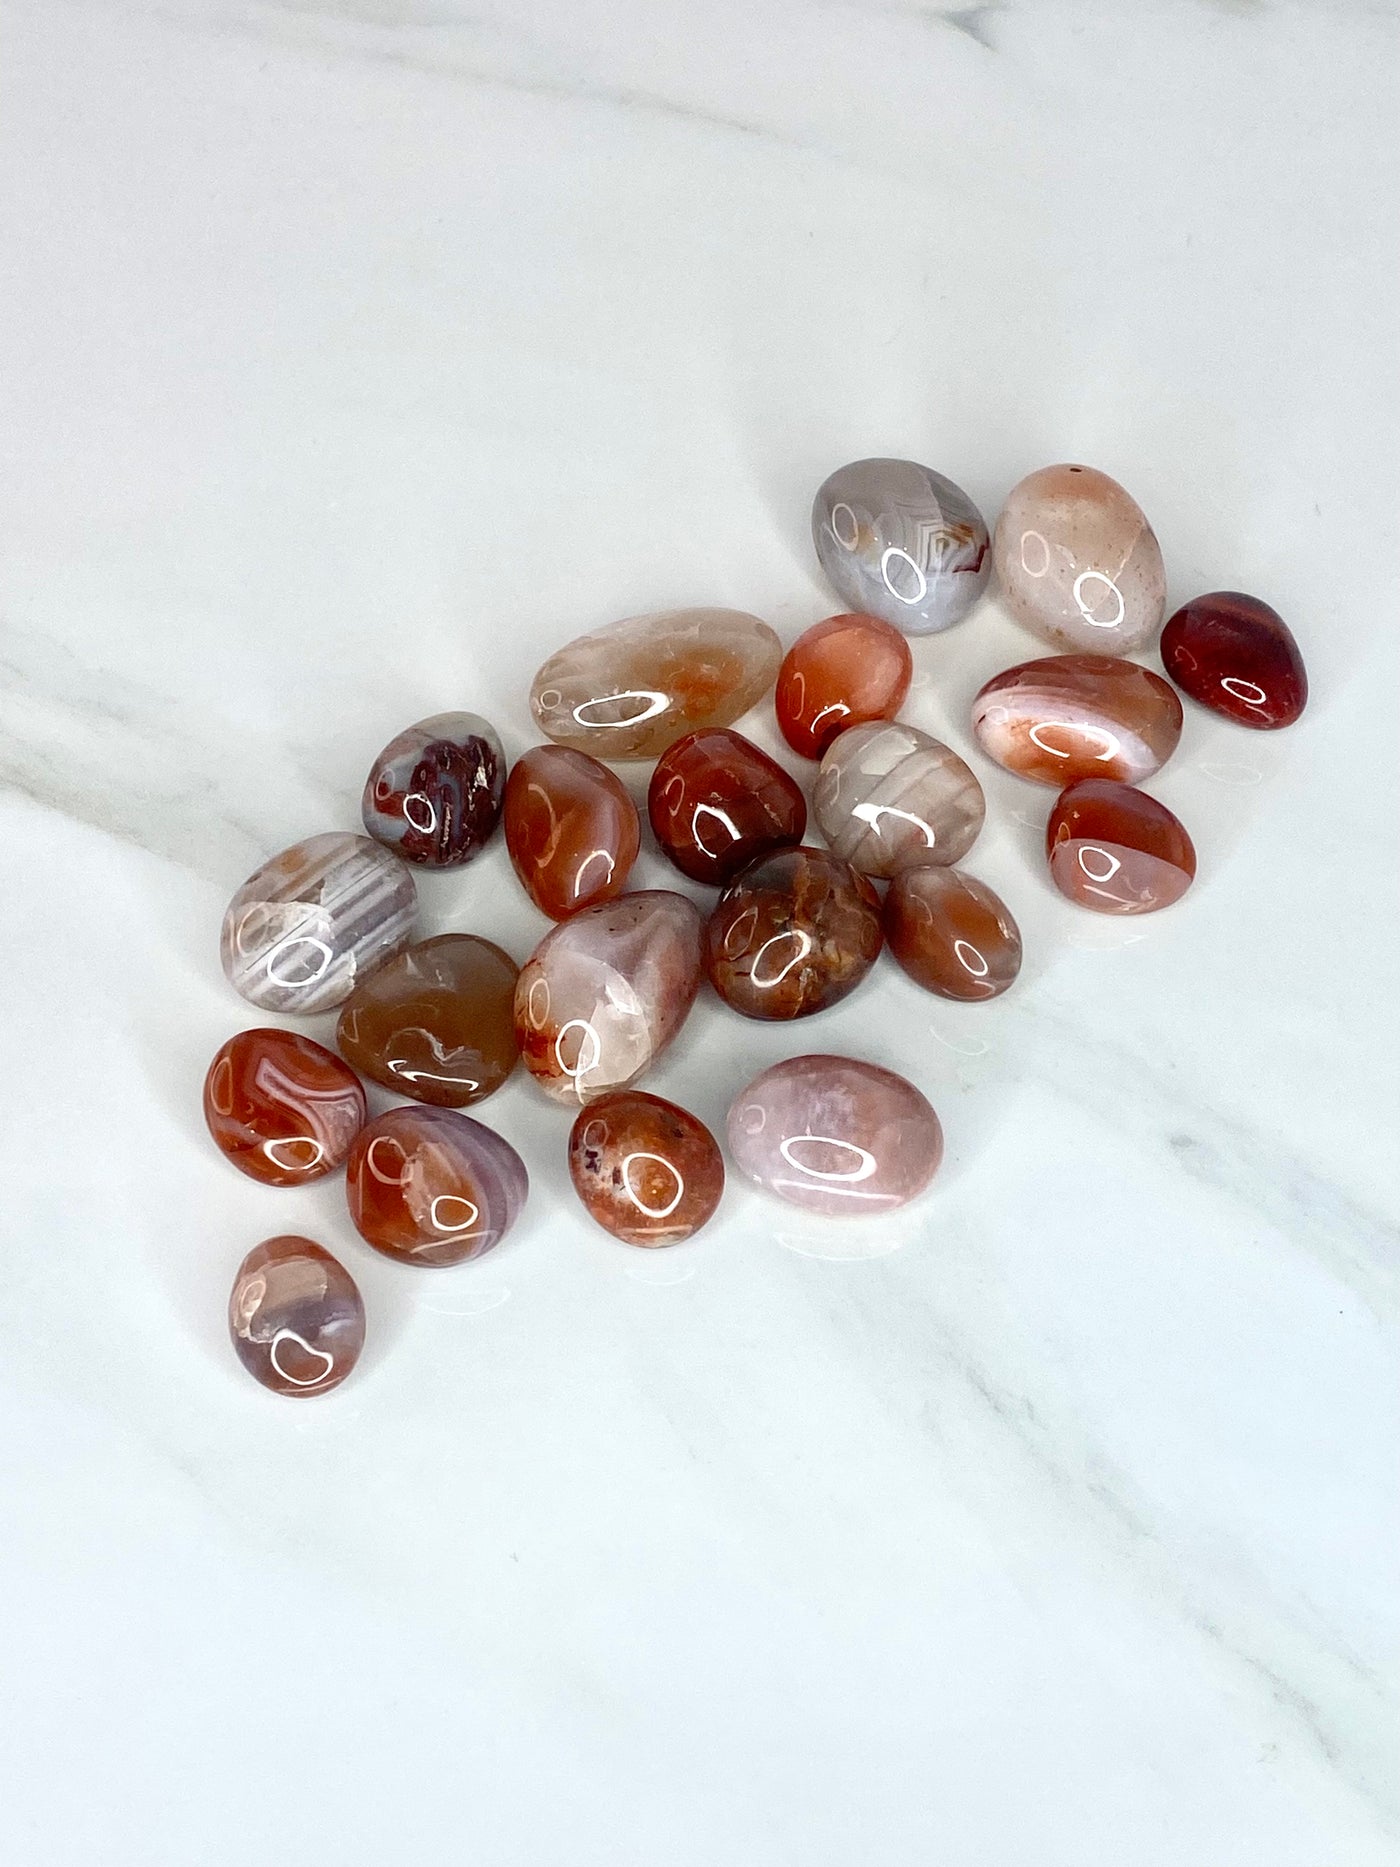 Fire Agate -The Stone of Passion